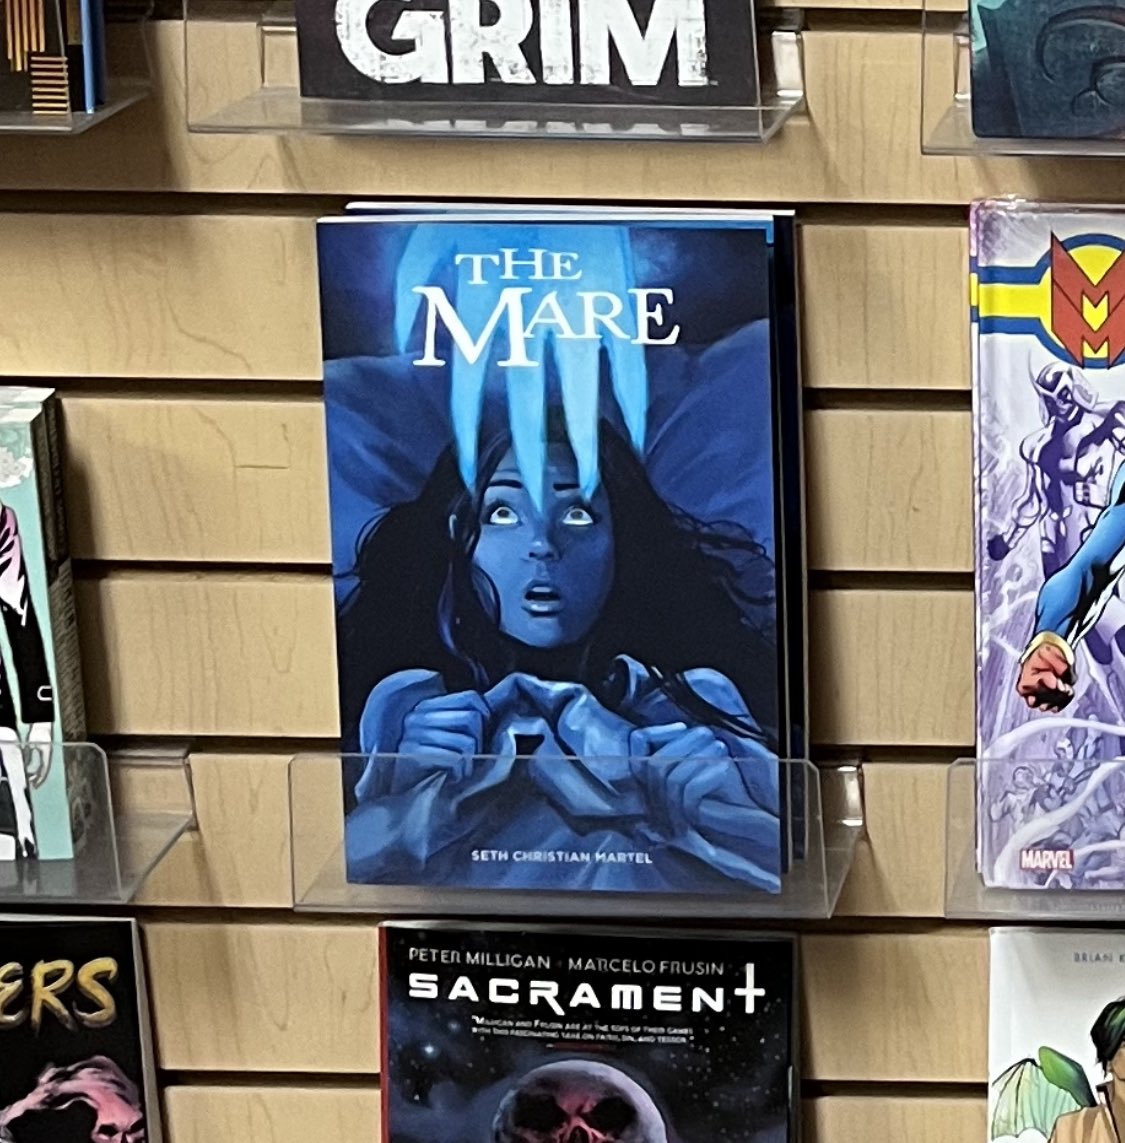 Thanks to #NoFlyingNoTights for the review of my YA spooky graphic novel, THE MARE. Find it at your local comic or book store!